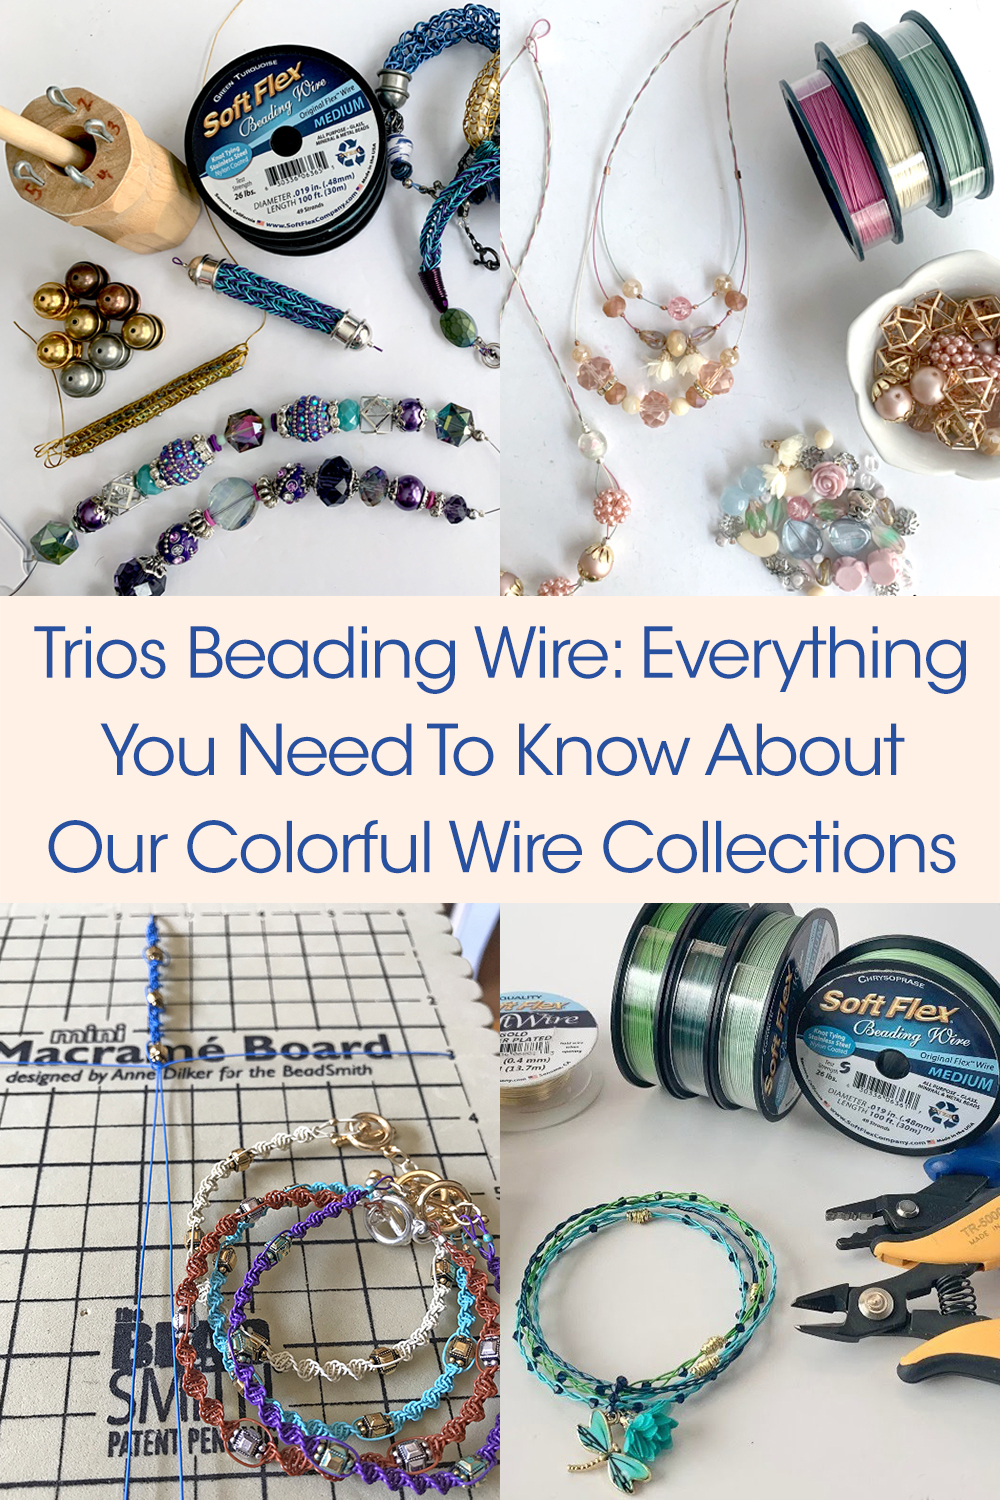 Trios Beading Wire: Everything You Need To Know About Our Colorful Wire  Collections - Soft Flex Company